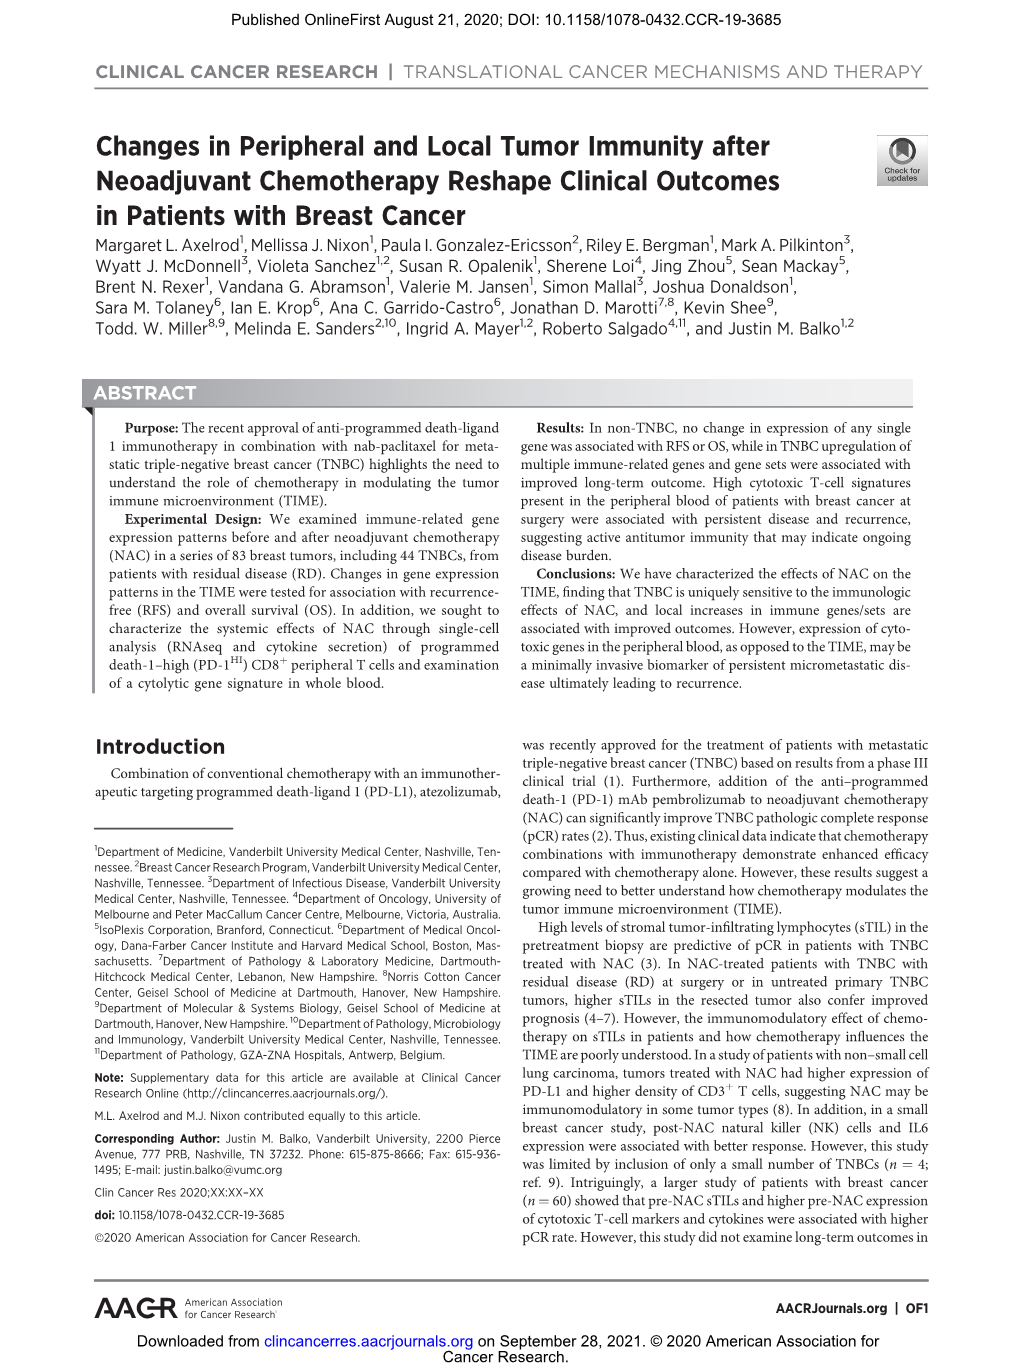 Changes in Peripheral and Local Tumor Immunity After Neoadjuvant Chemotherapy Reshape Clinical Outcomes in Patients with Breast Cancer Margaret L